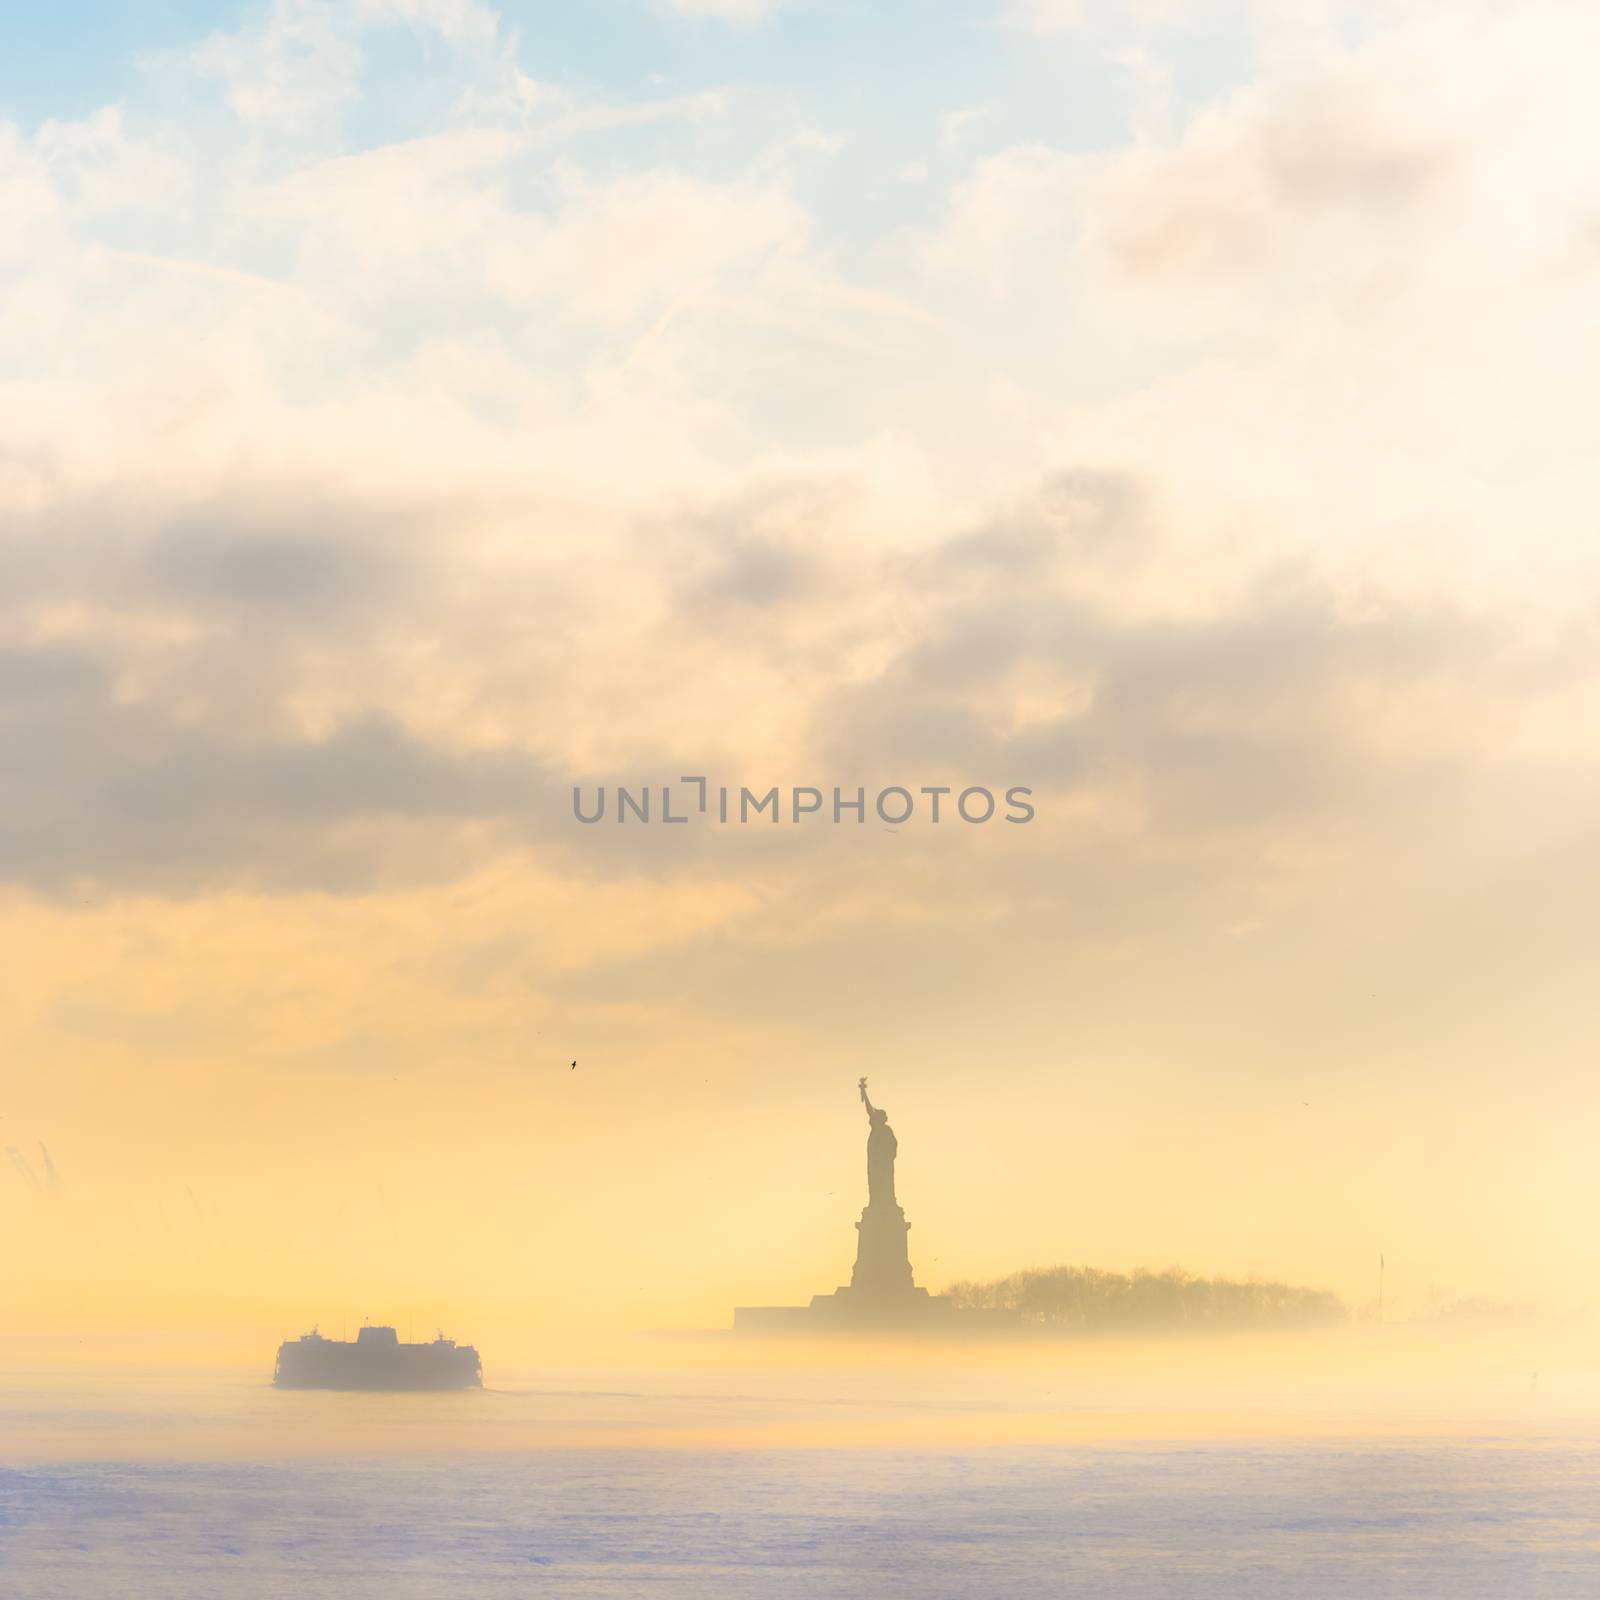 Staten Island Ferry cruises past the Statue of Liberty. by kasto